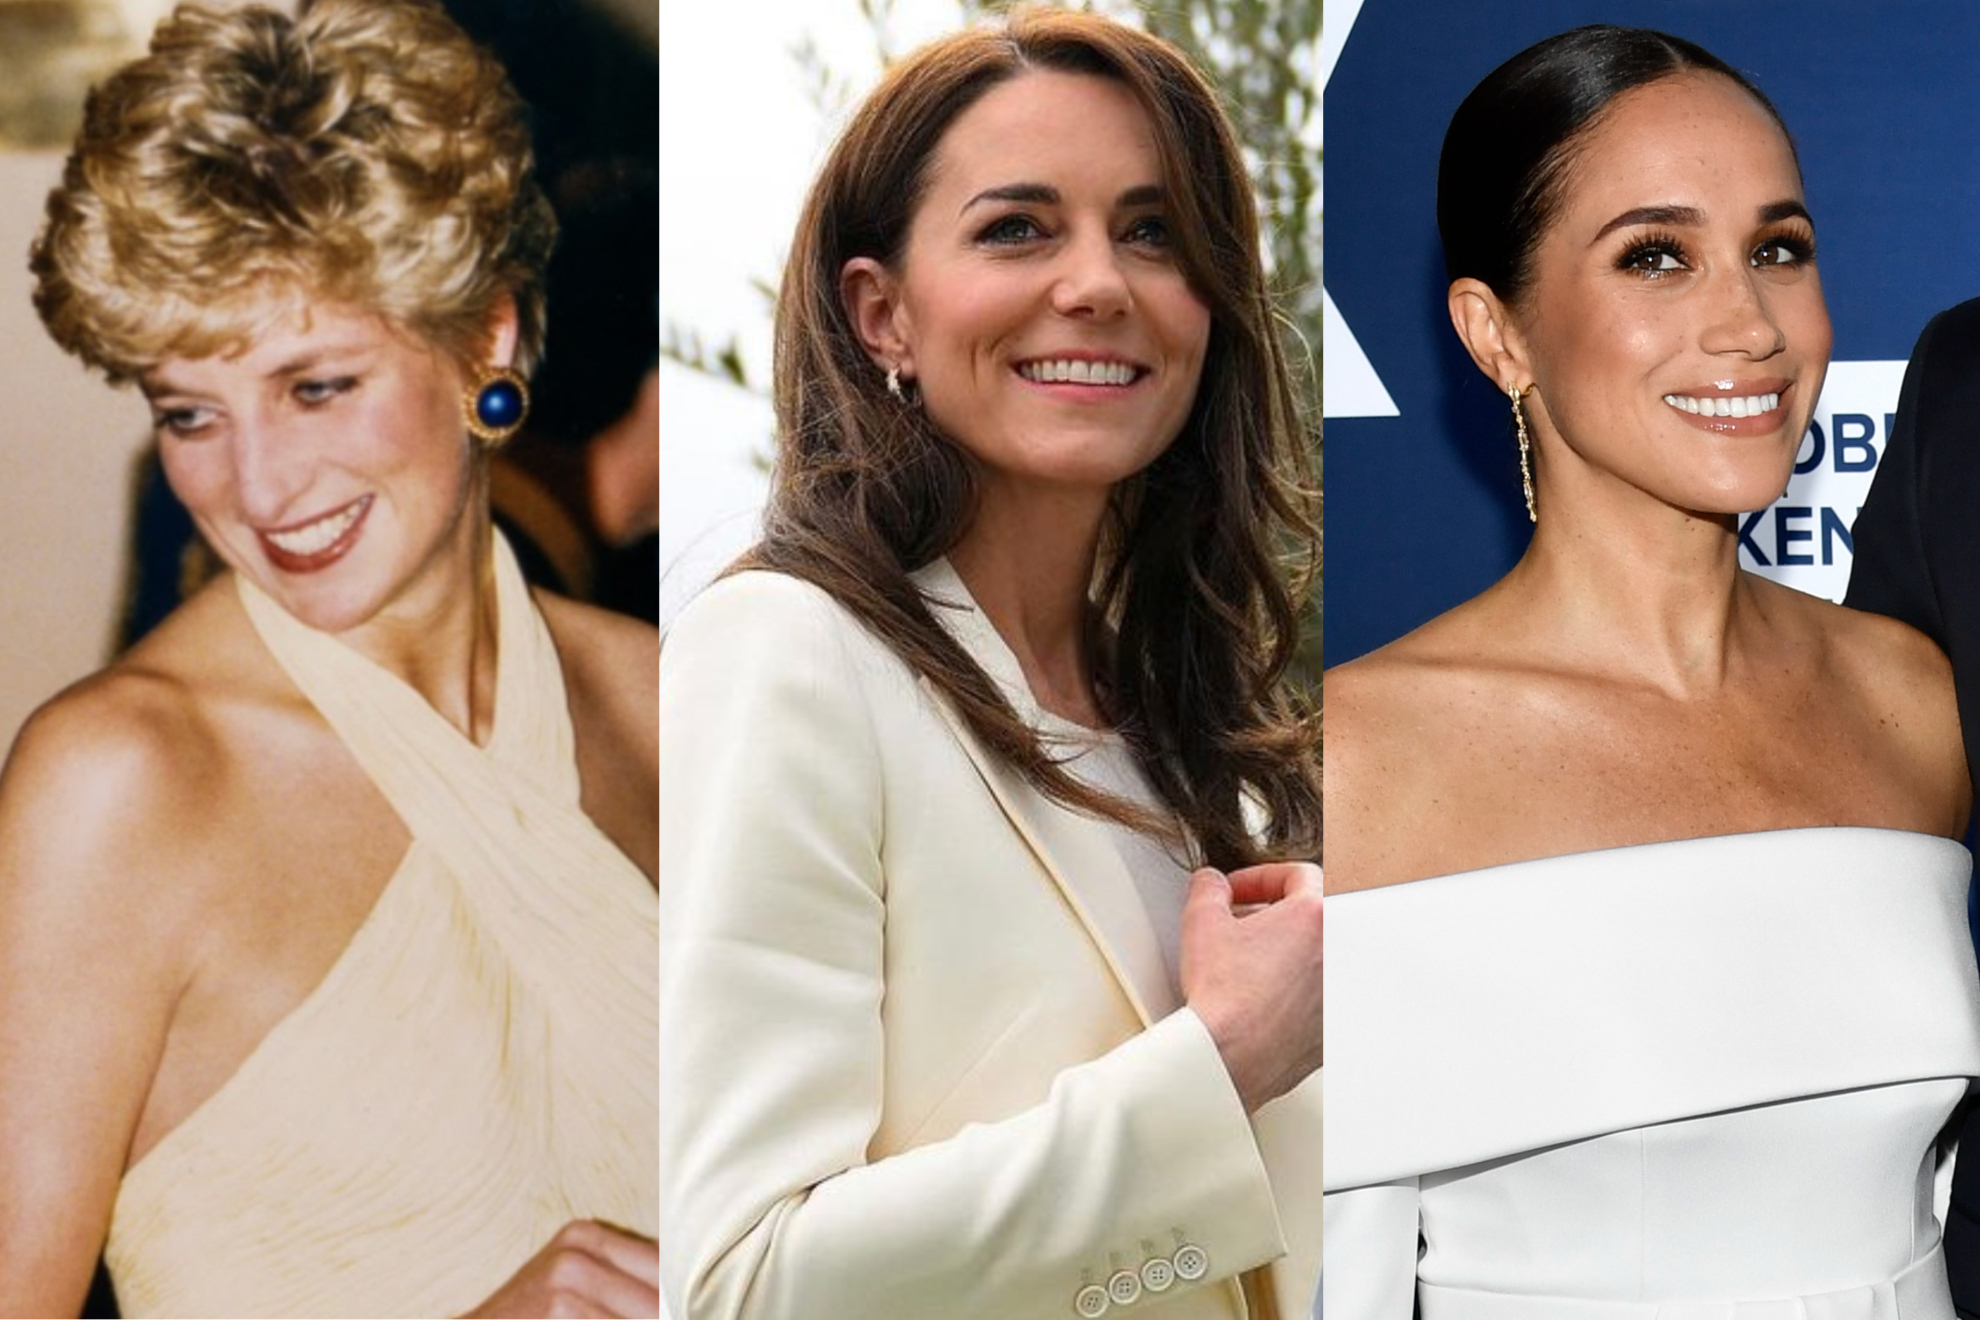 Dayana Wwwe Xxx - Sex dolls based on Princess Diana, Kate Middleton and Meghan Markle among  most requested by kinky users | Marca